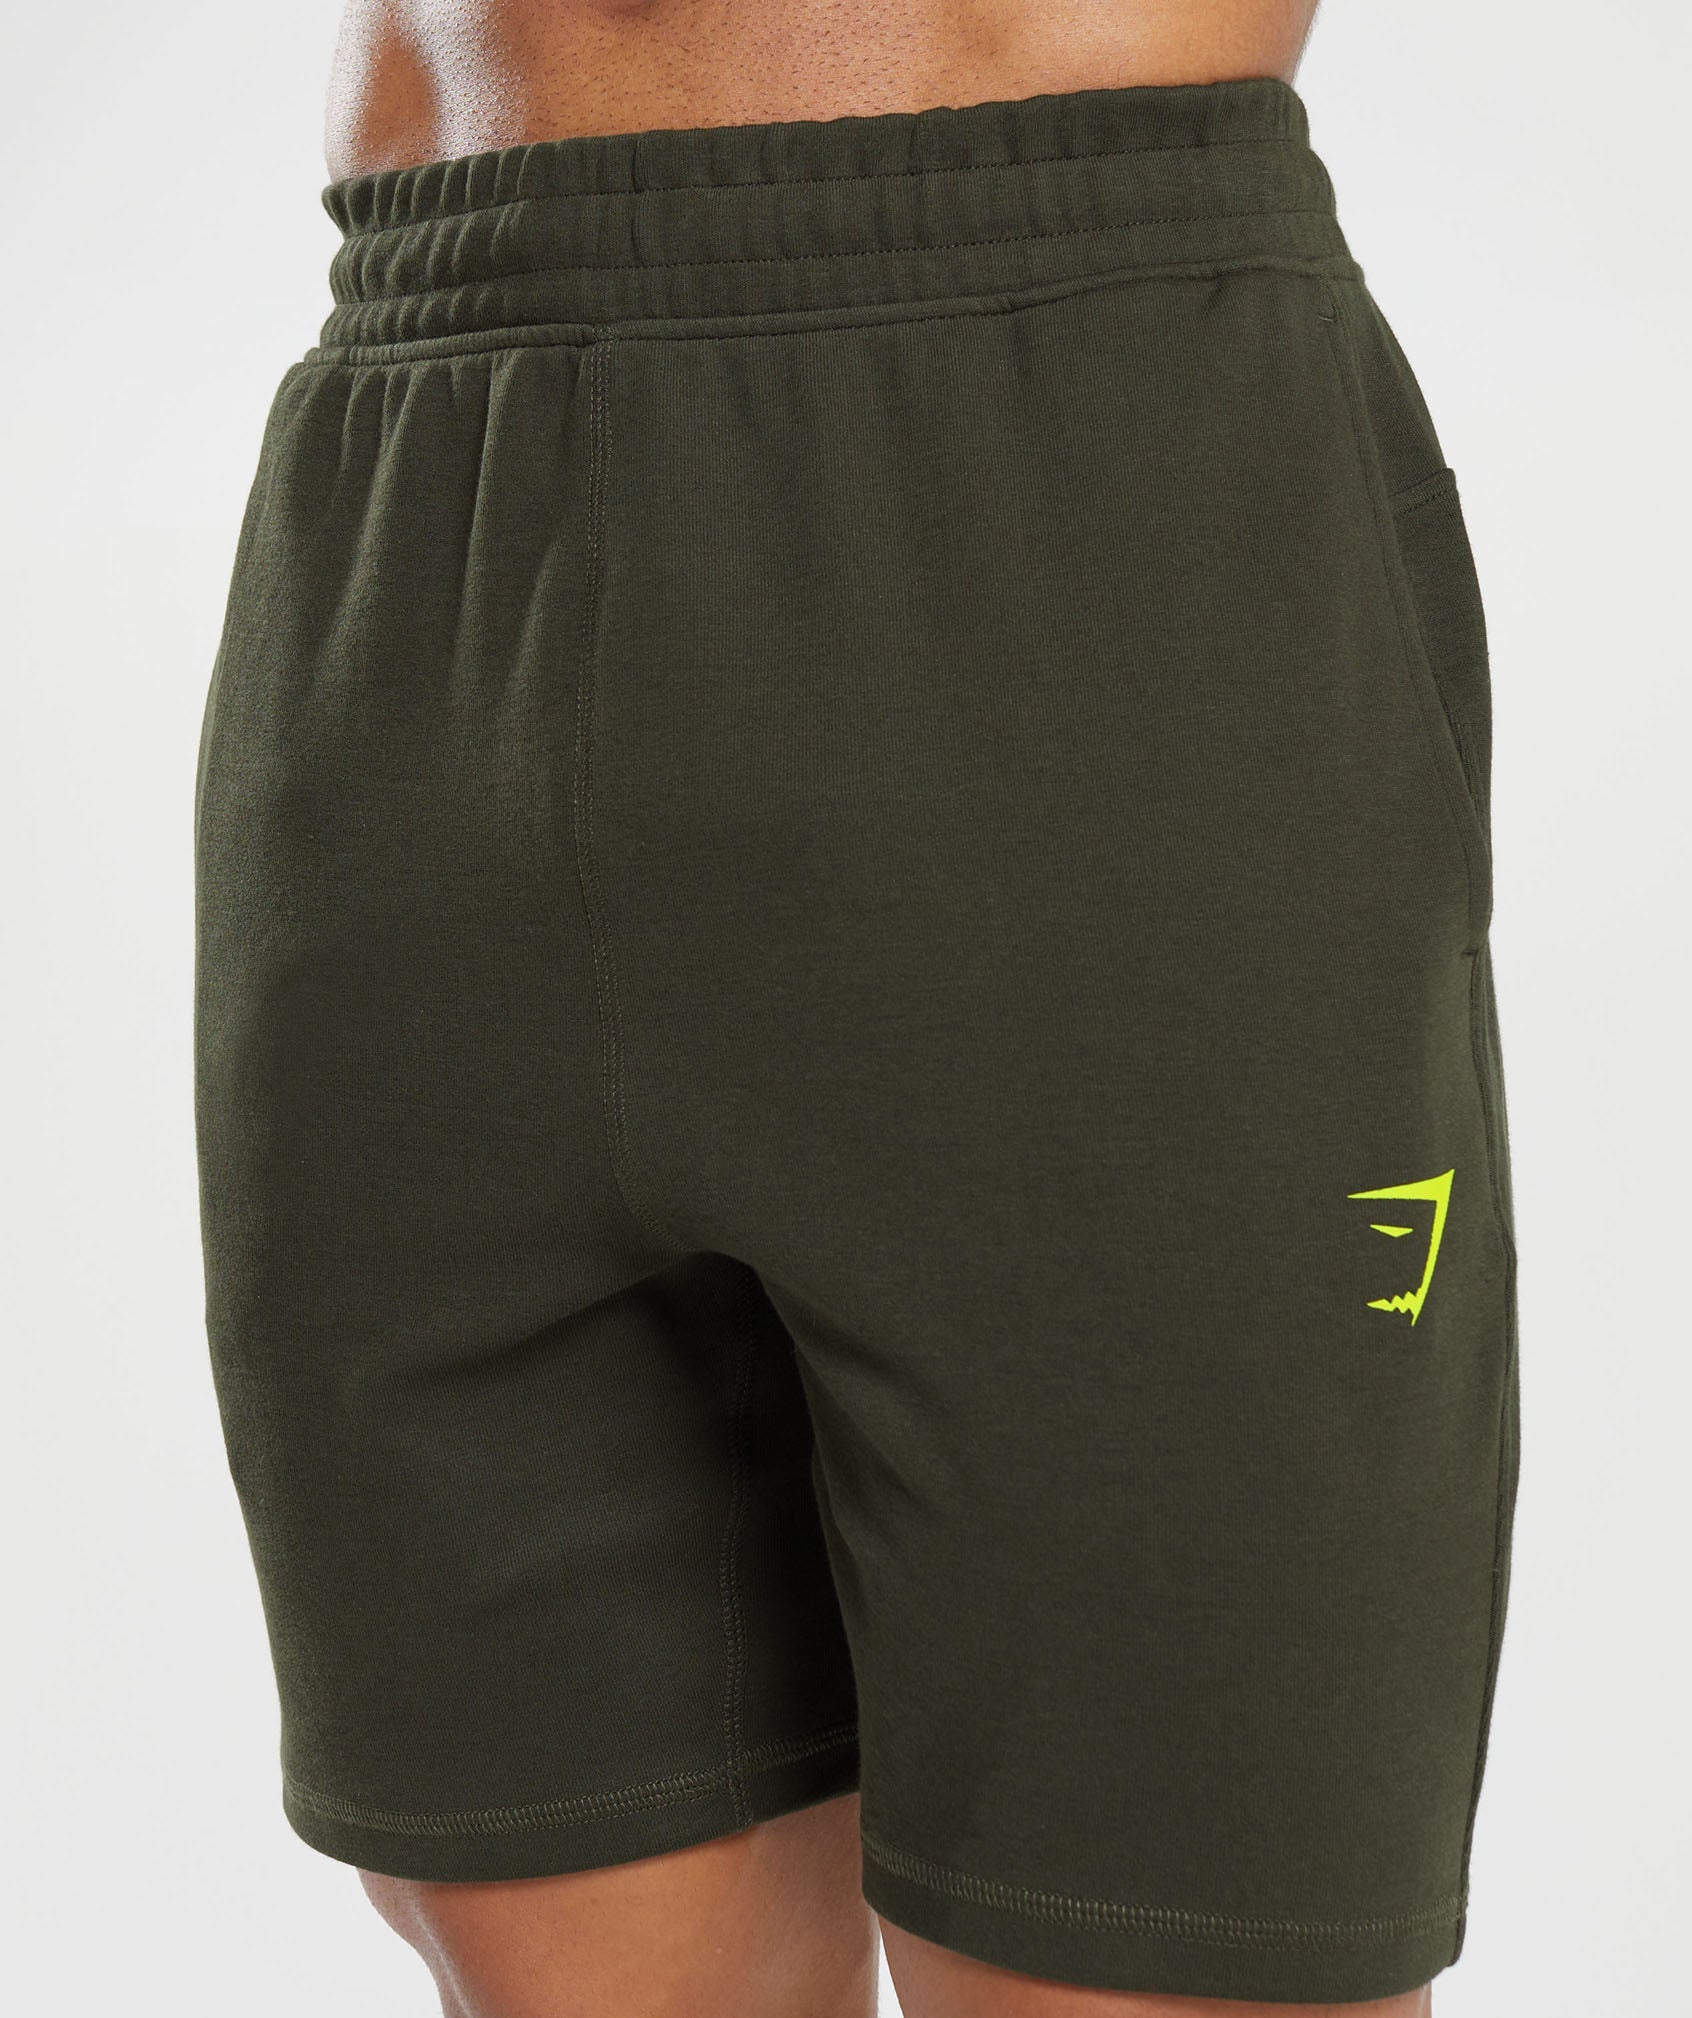 Bold 7" Shorts in Deep Olive Green - view 5